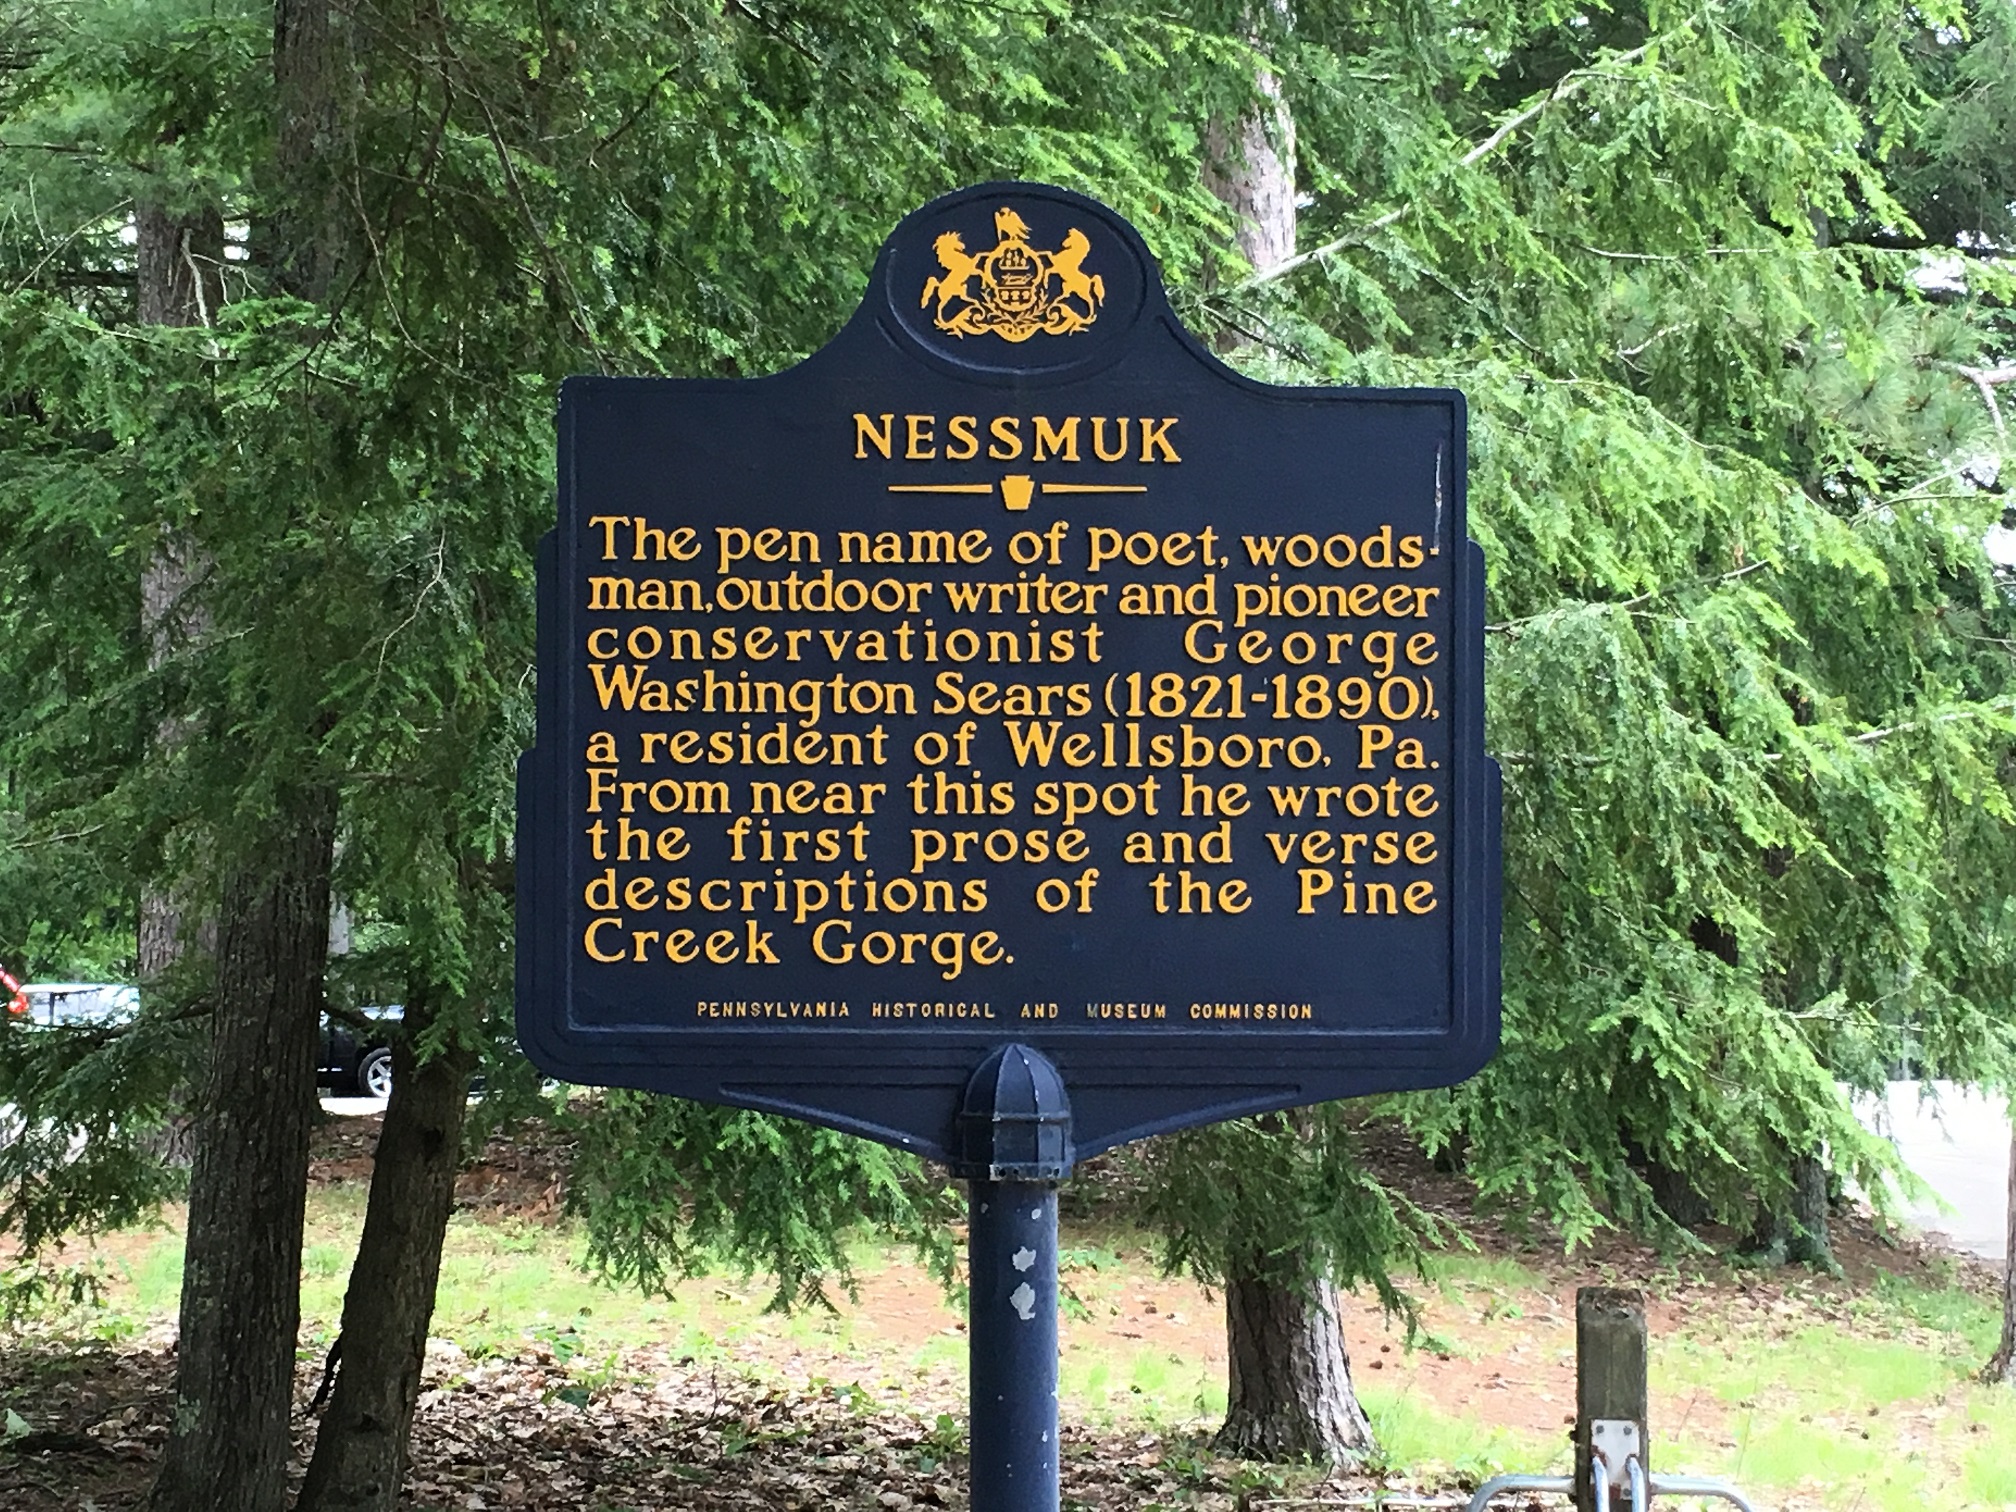 "Nessmuk" marker for George Washington Sears and his writings about Pine Creek Gorge in Tioga County.